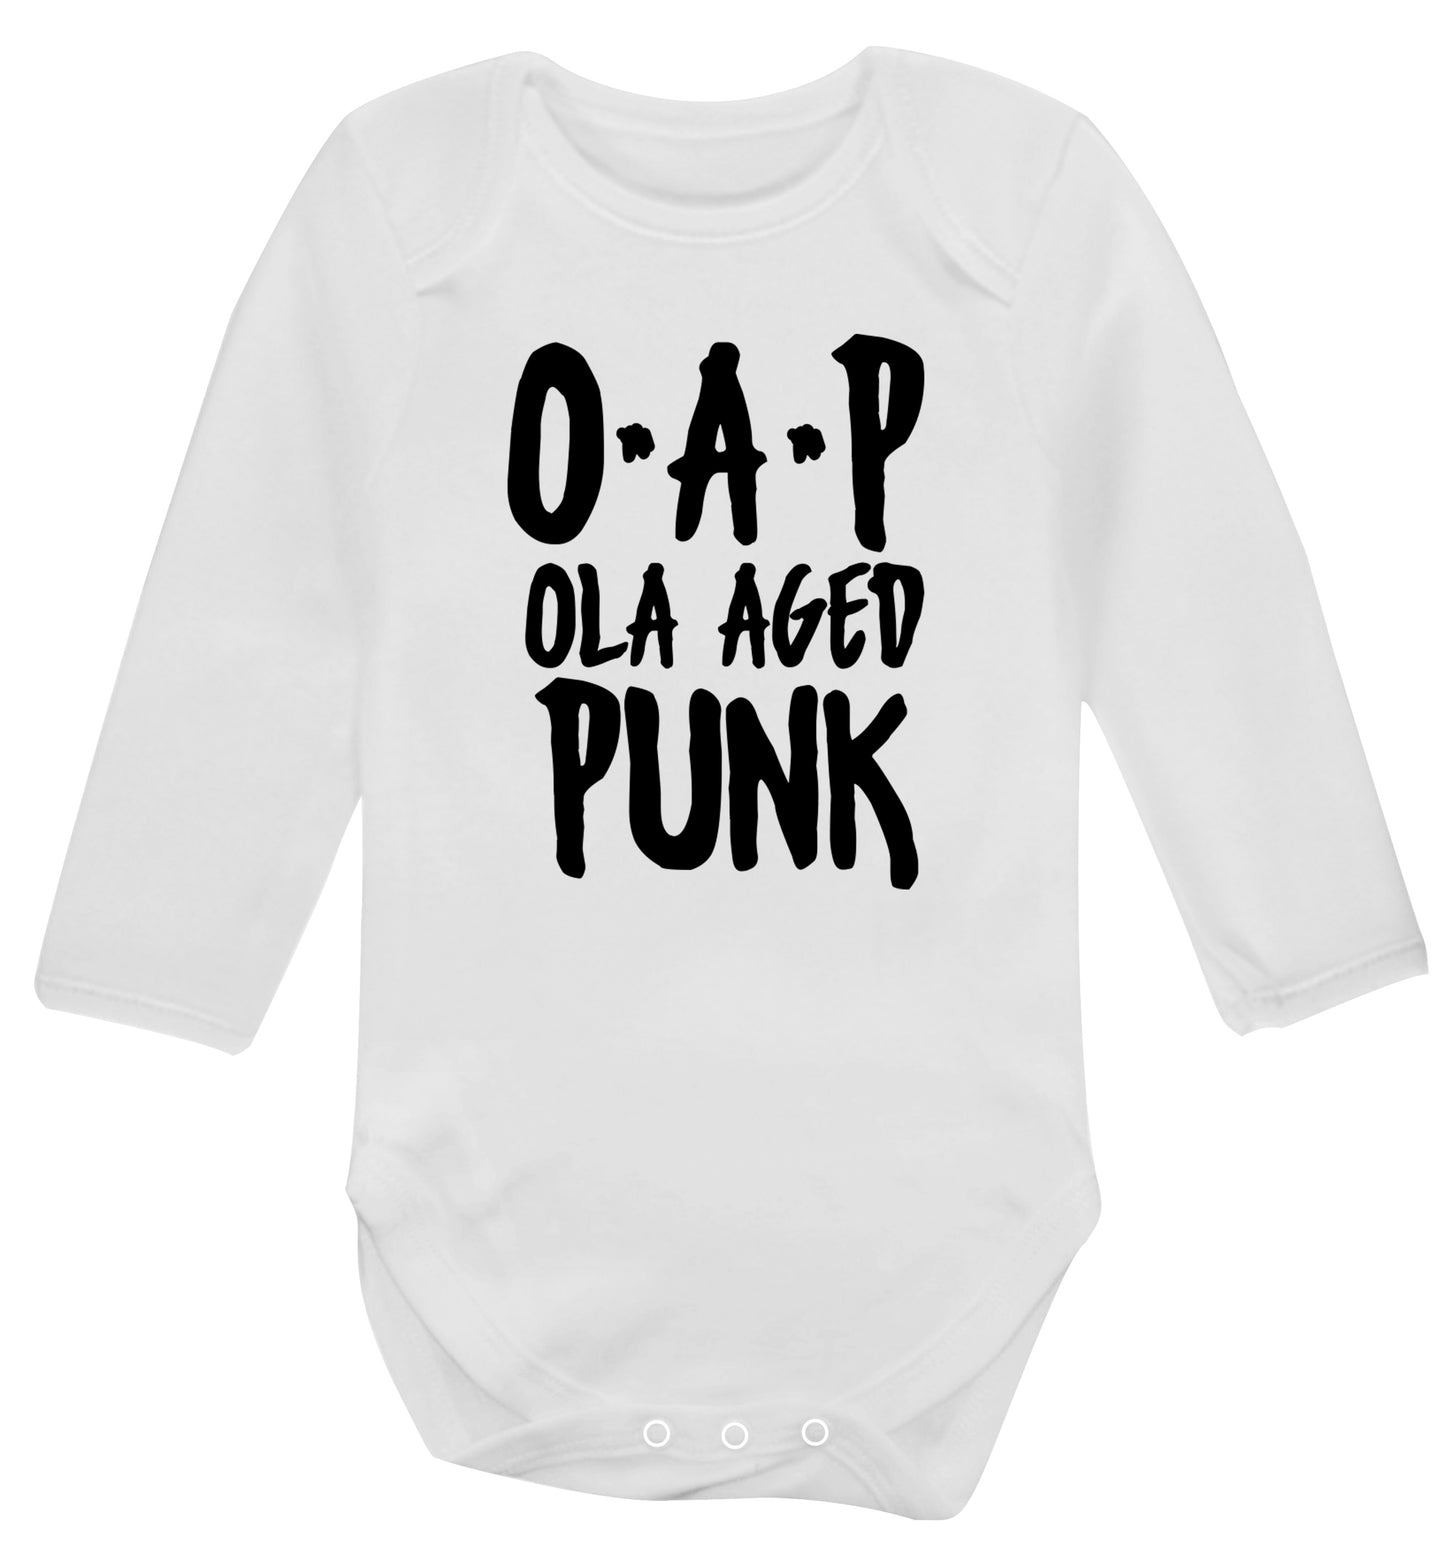 O.A.P Old Aged Punk Baby Vest long sleeved white 6-12 months